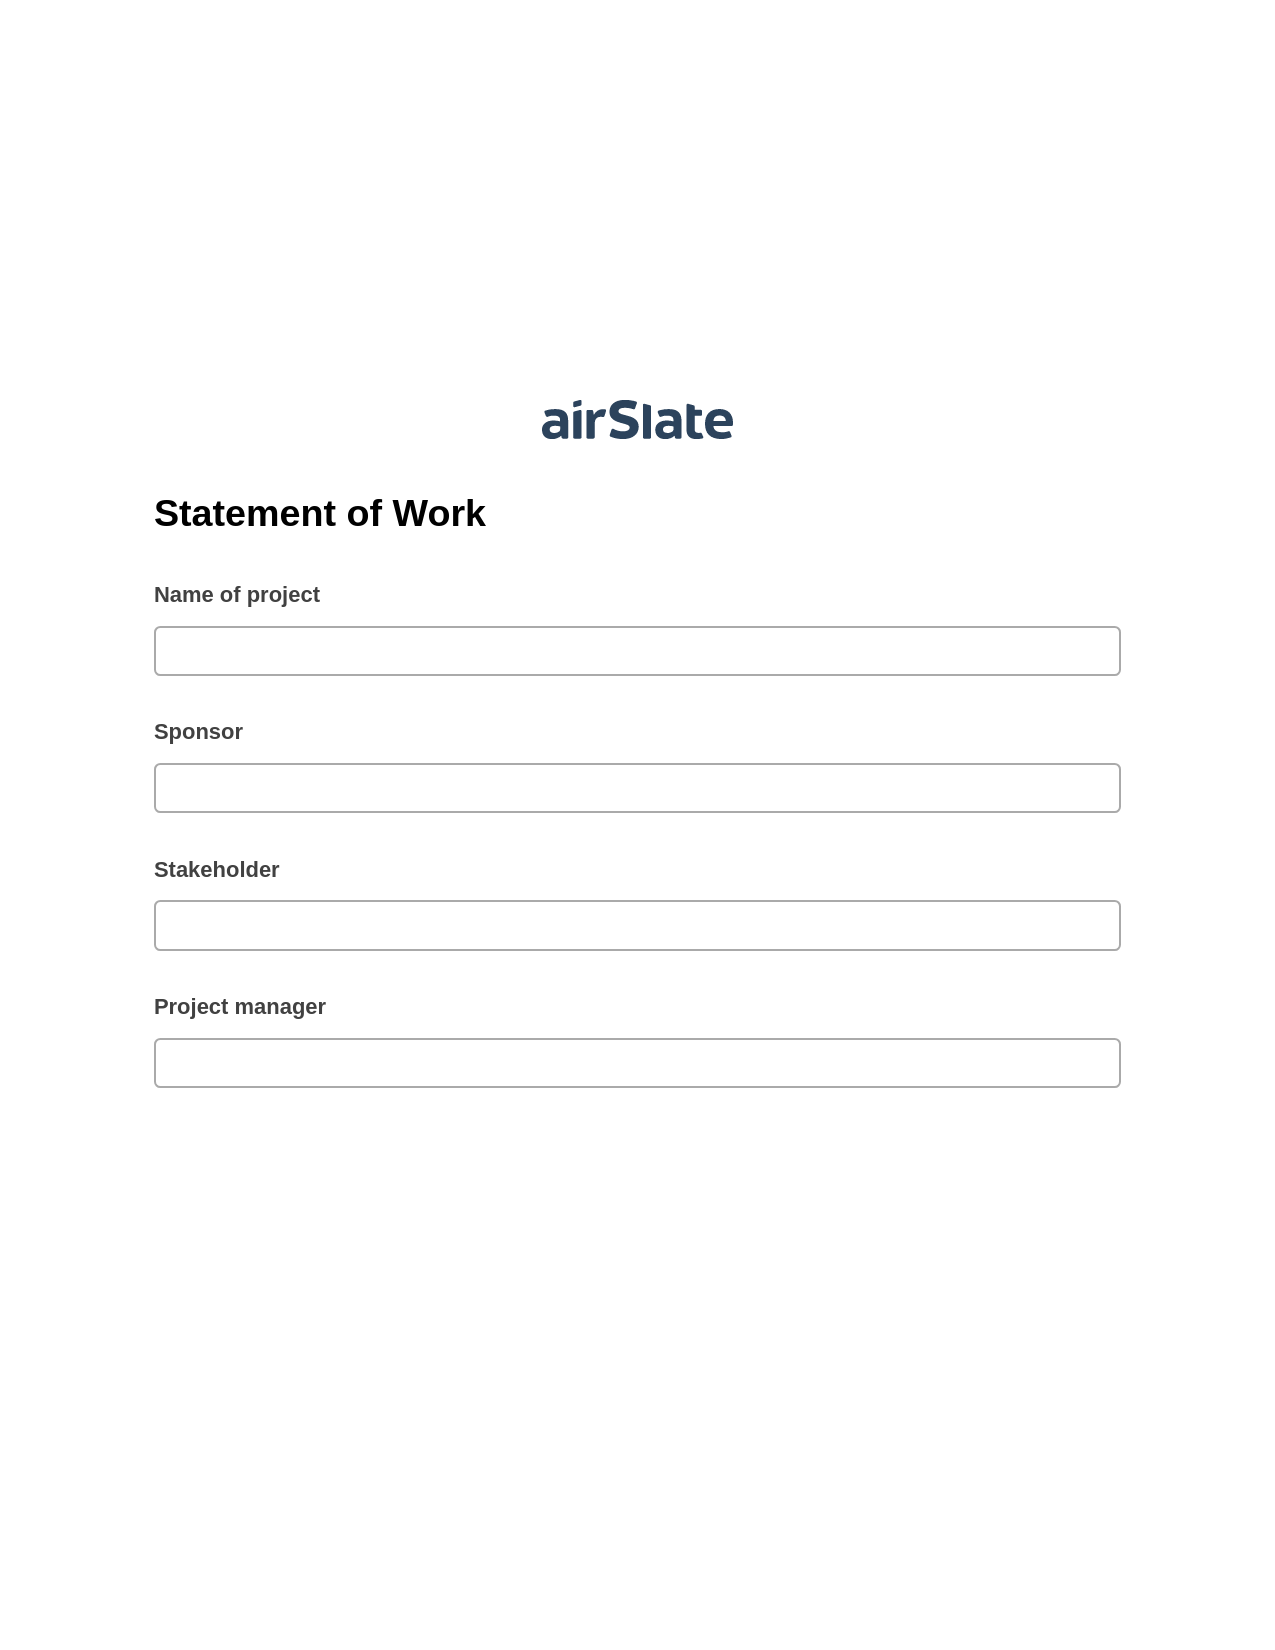 Statement of Work Pre-fill Document Bot, Remove Tags From Slate Bot, Post-finish Document Bot